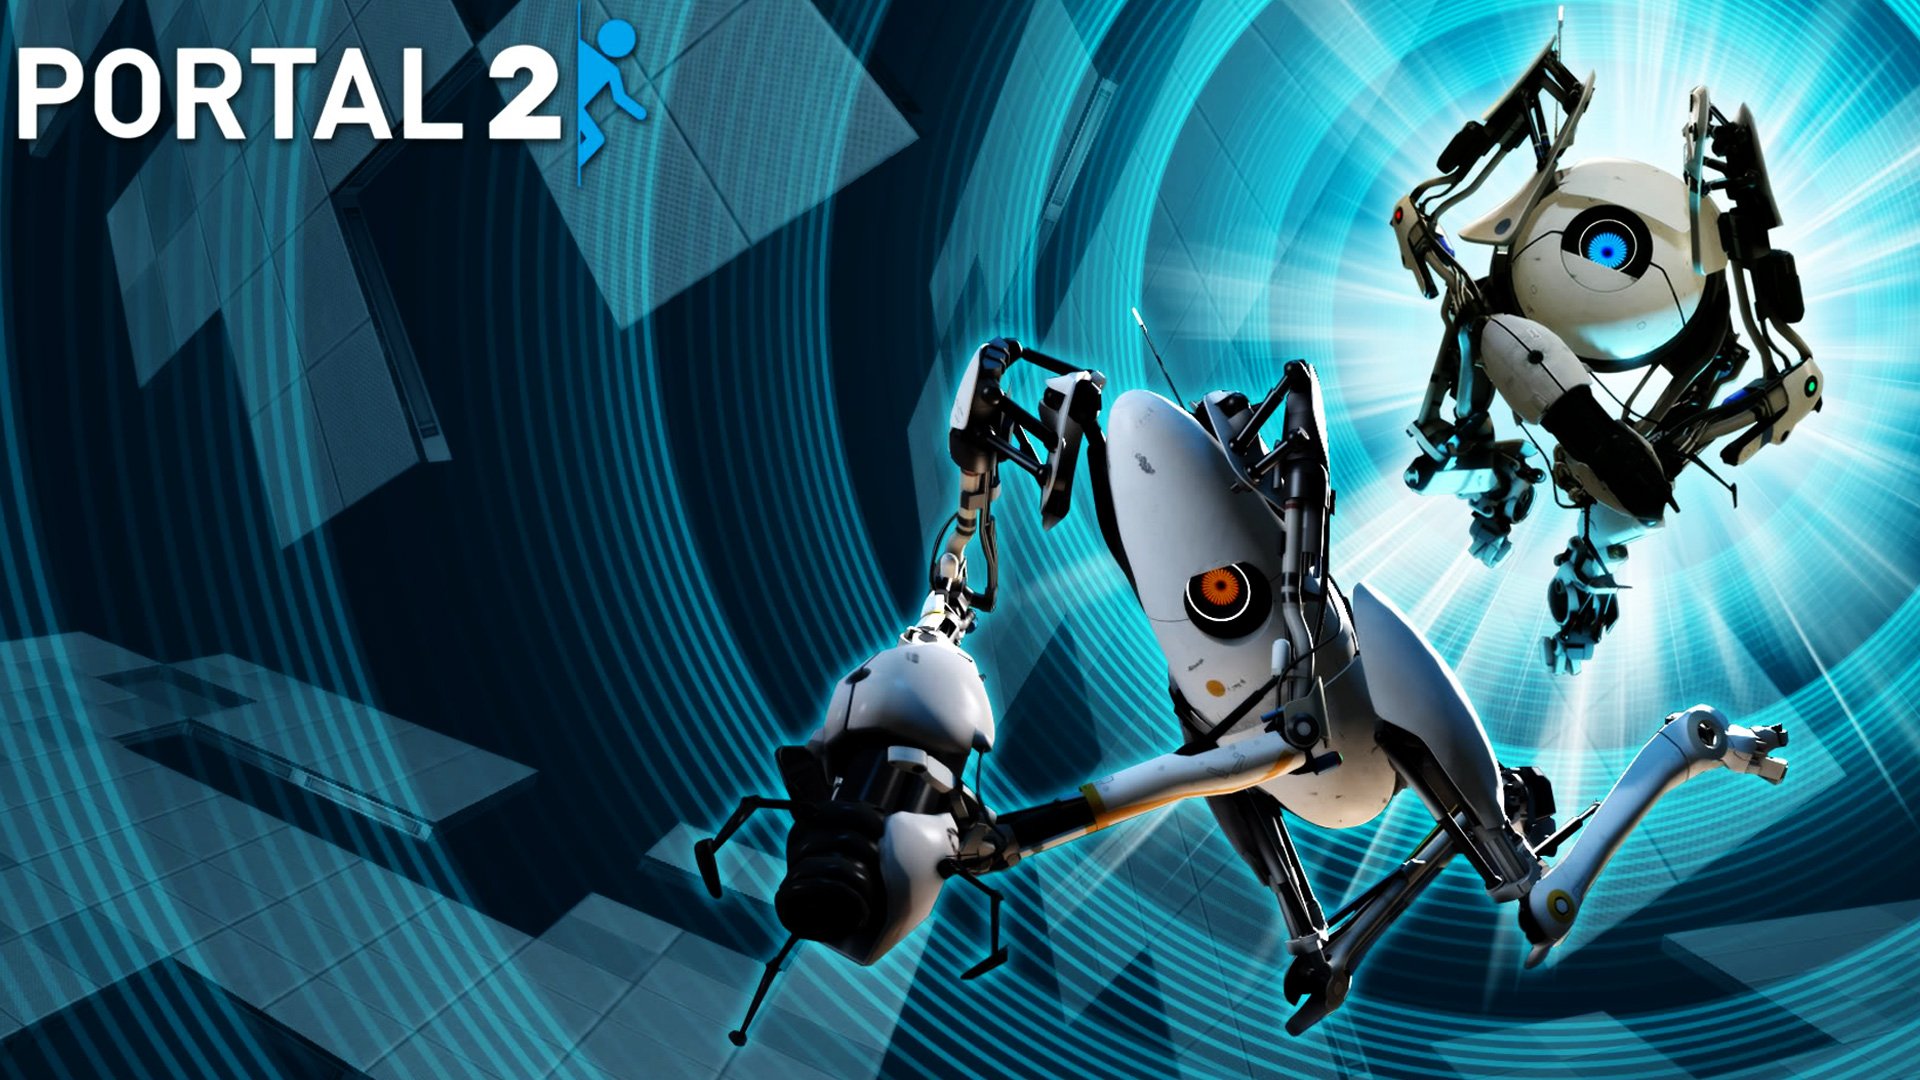  wallpapers of Portal 2 You are downloading Portal 2 wallpaper 11 1920x1080